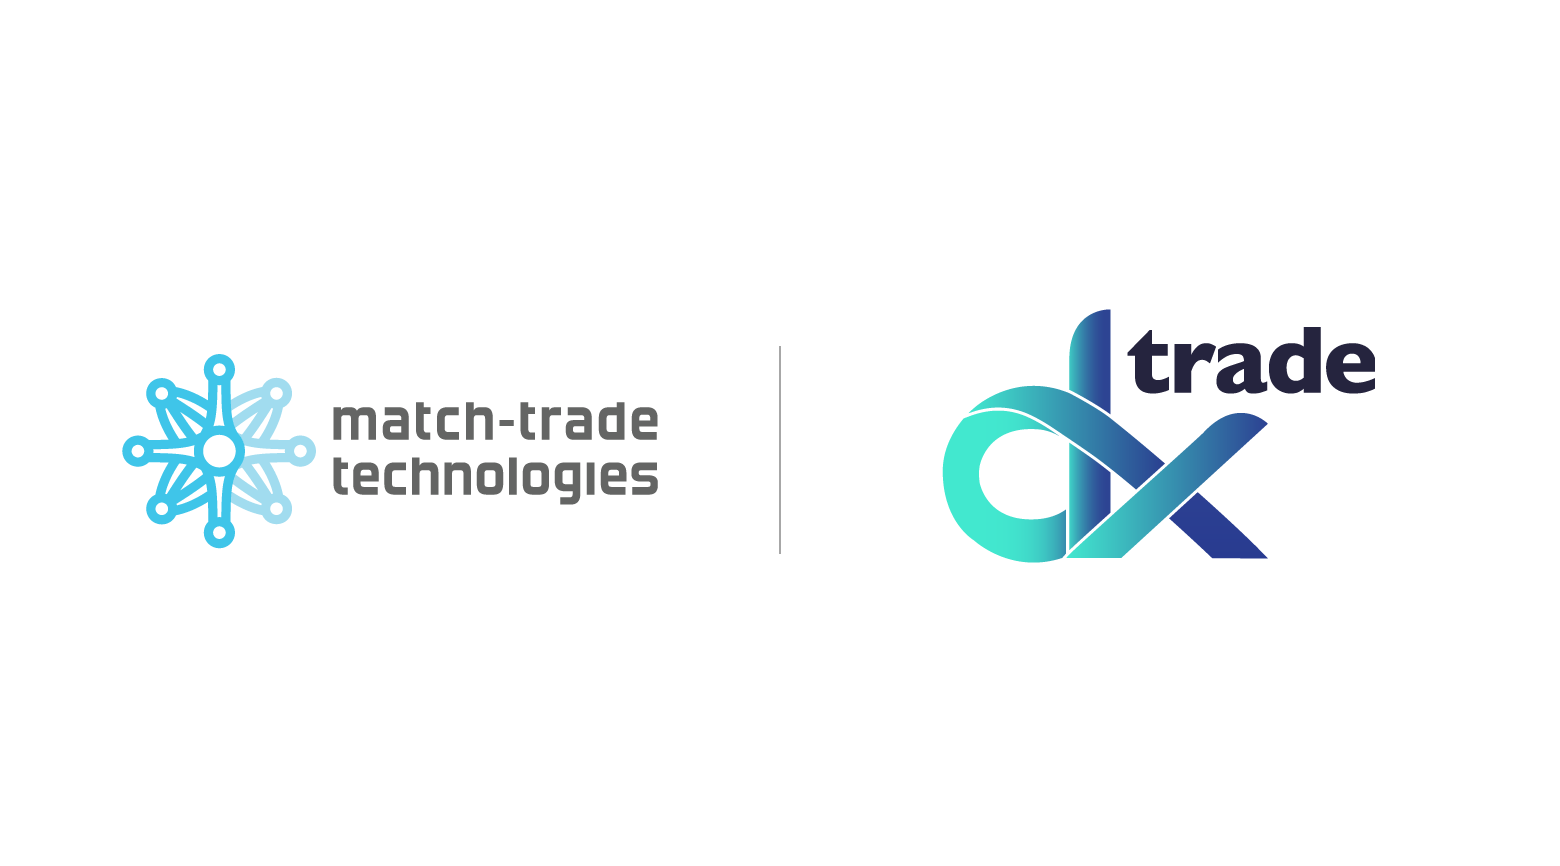 MatchTrade and DXtrade logos